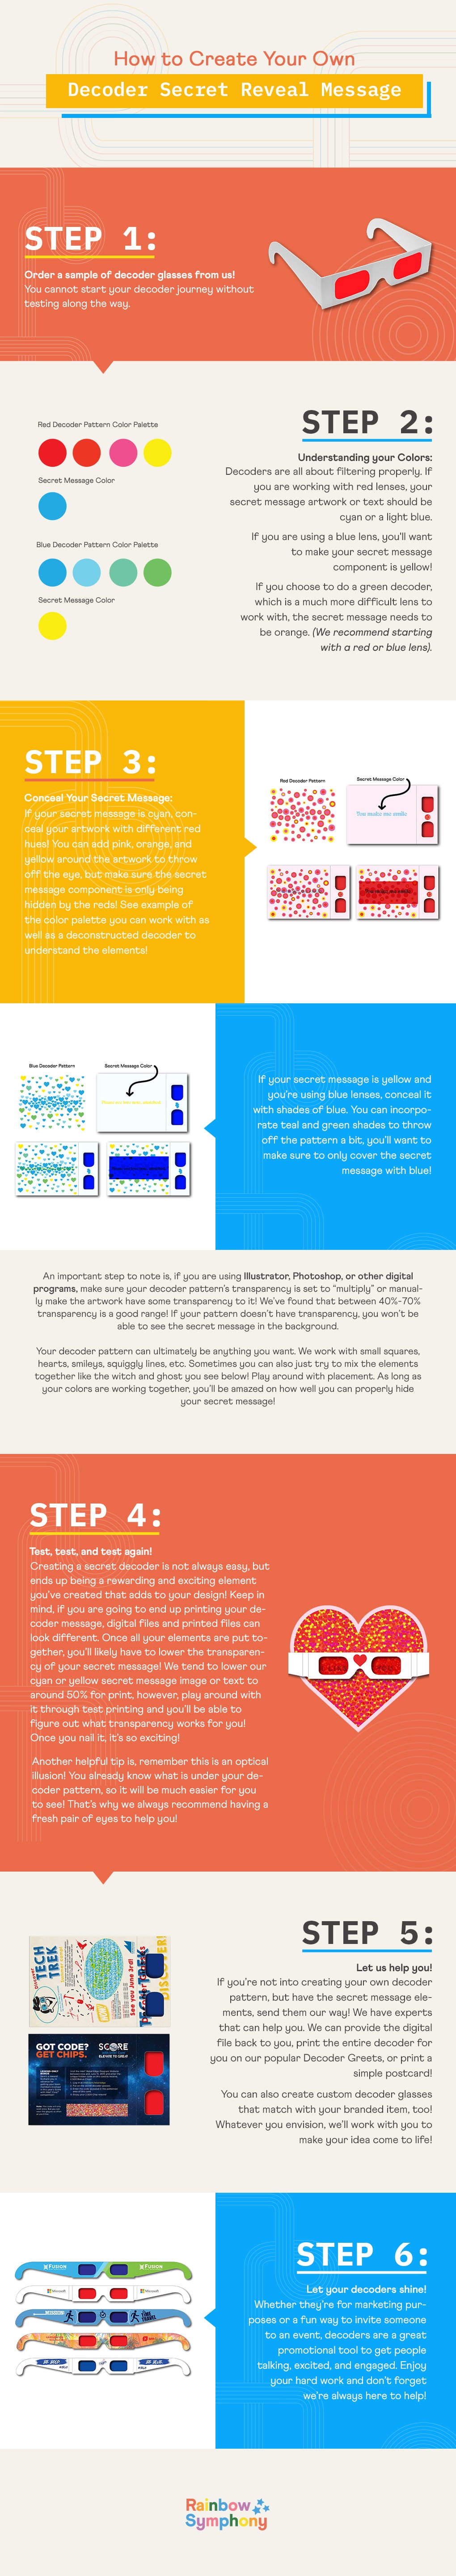 An infographic by Rainbow Symphony that explains how to create your own secret message that can be revealed with decoder glasses